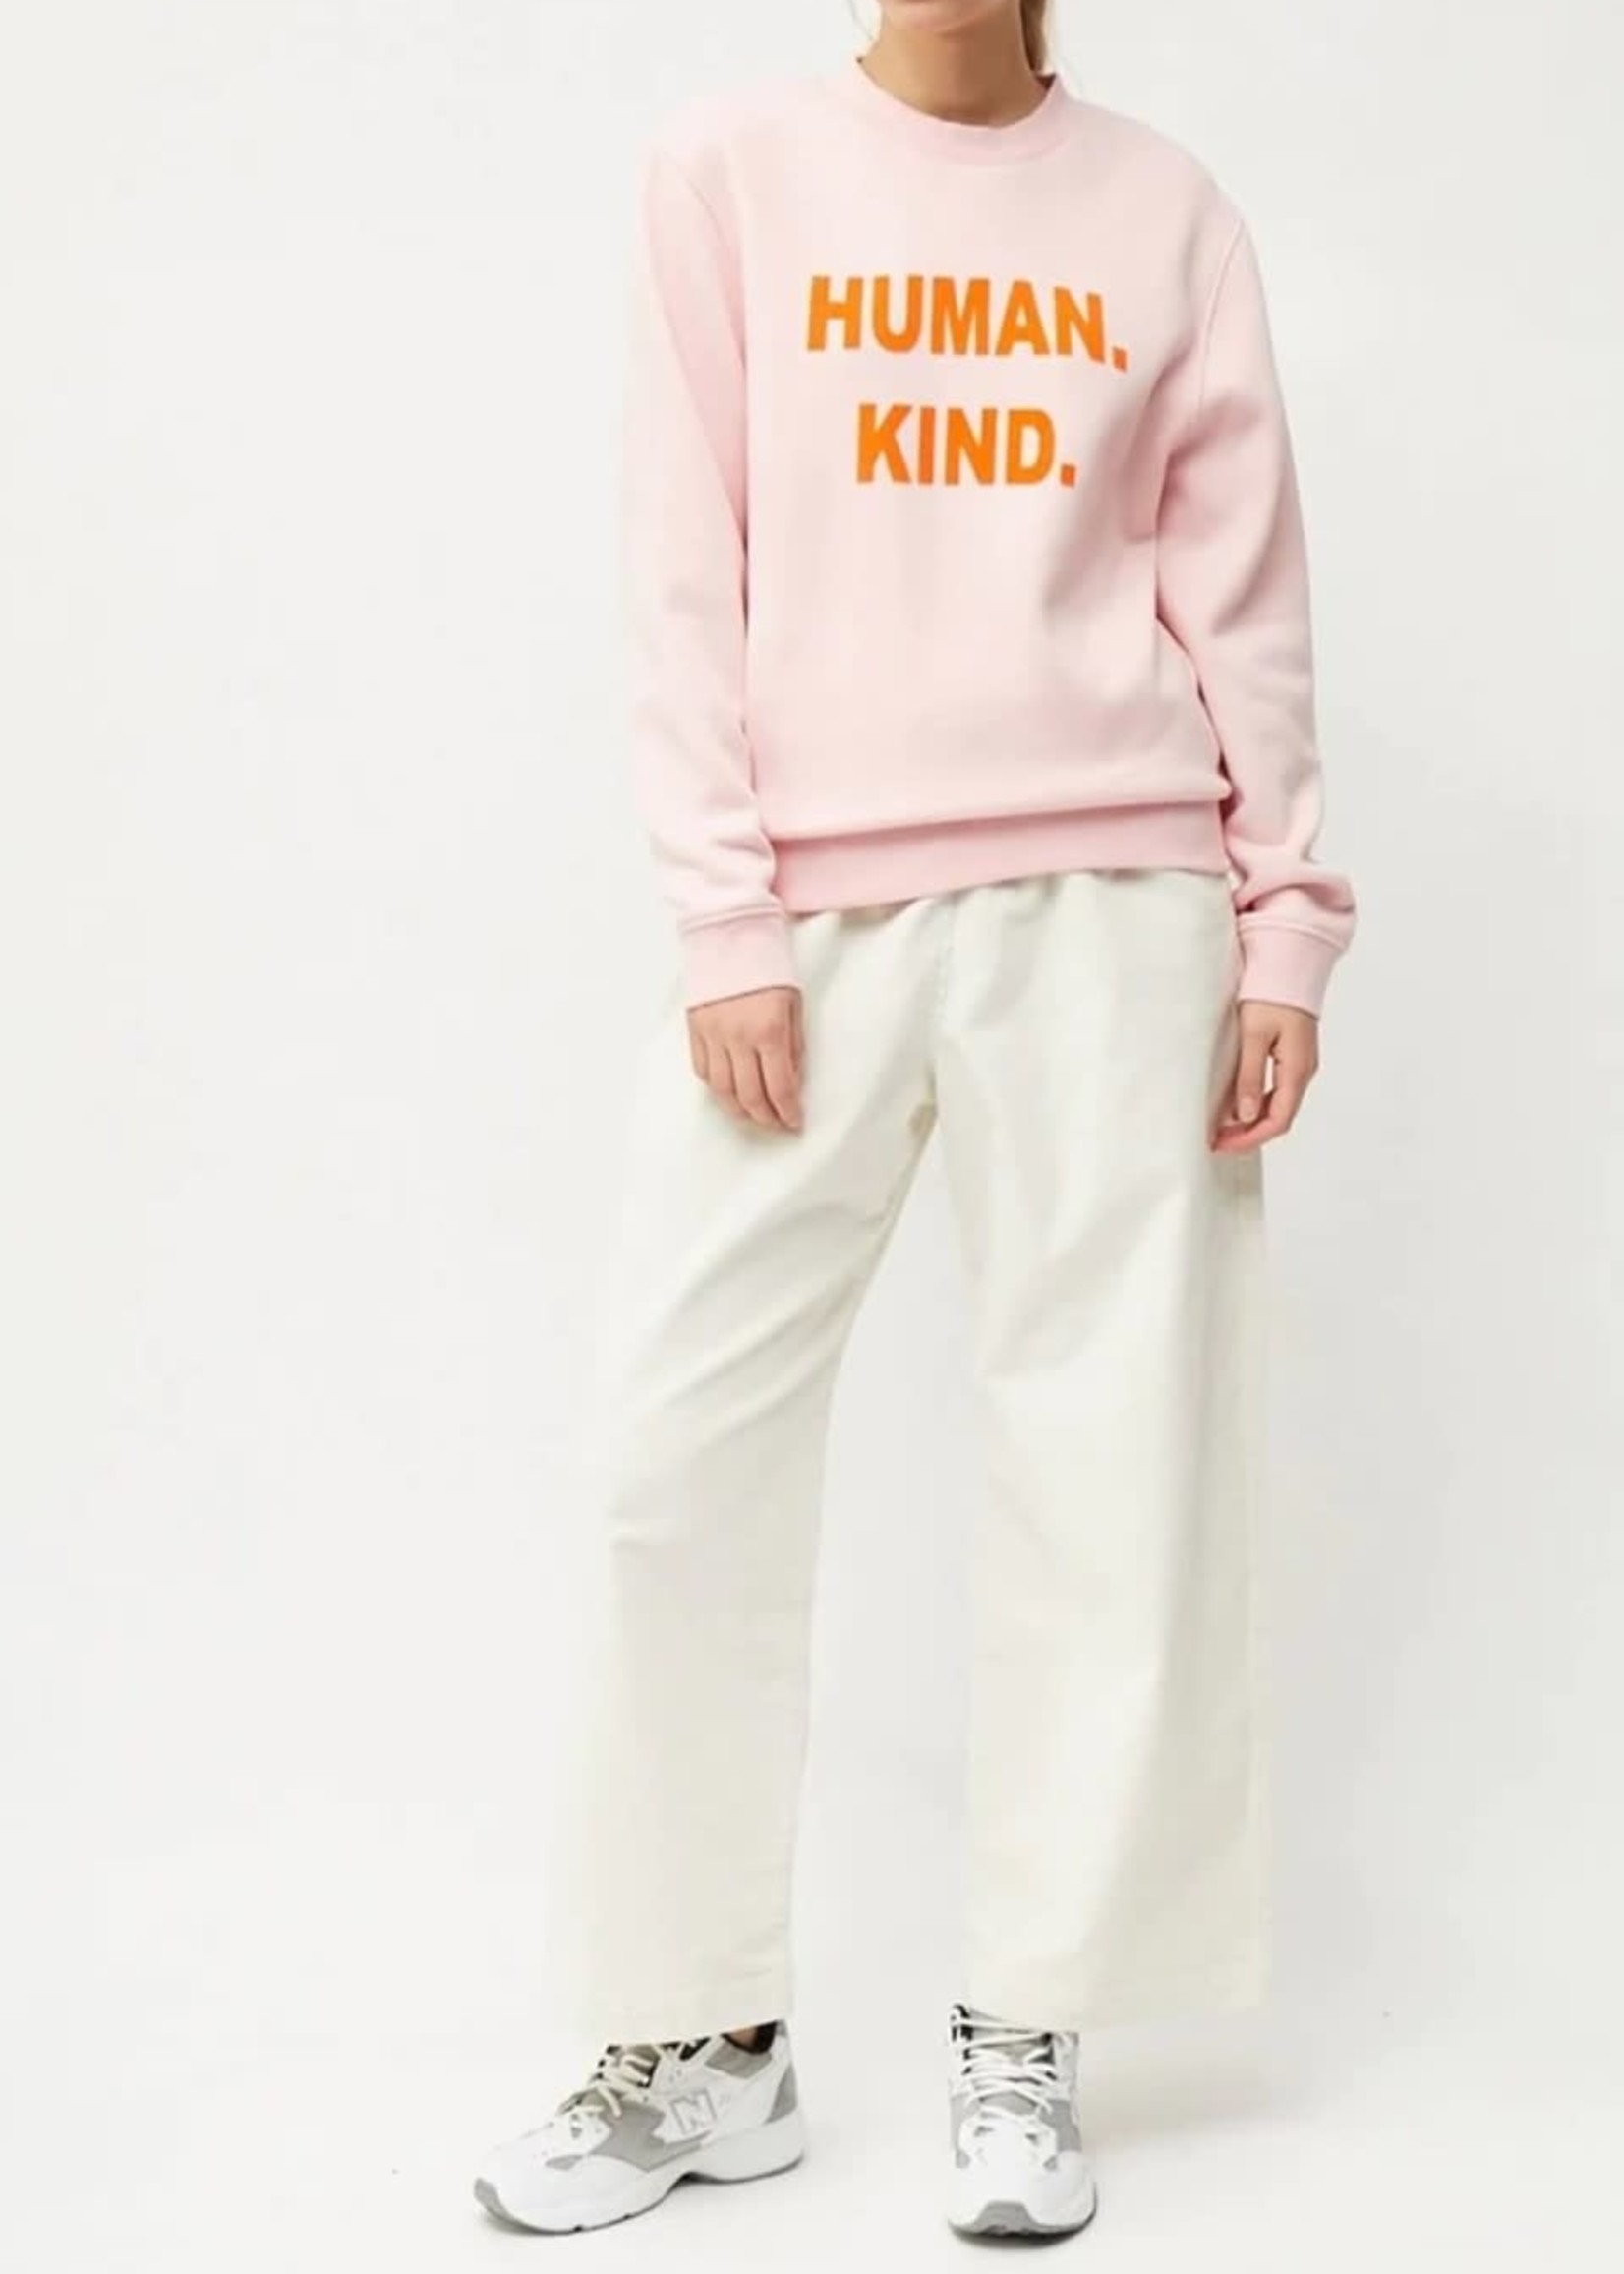 French Connection - Human Kind Sweatshirt - Rose